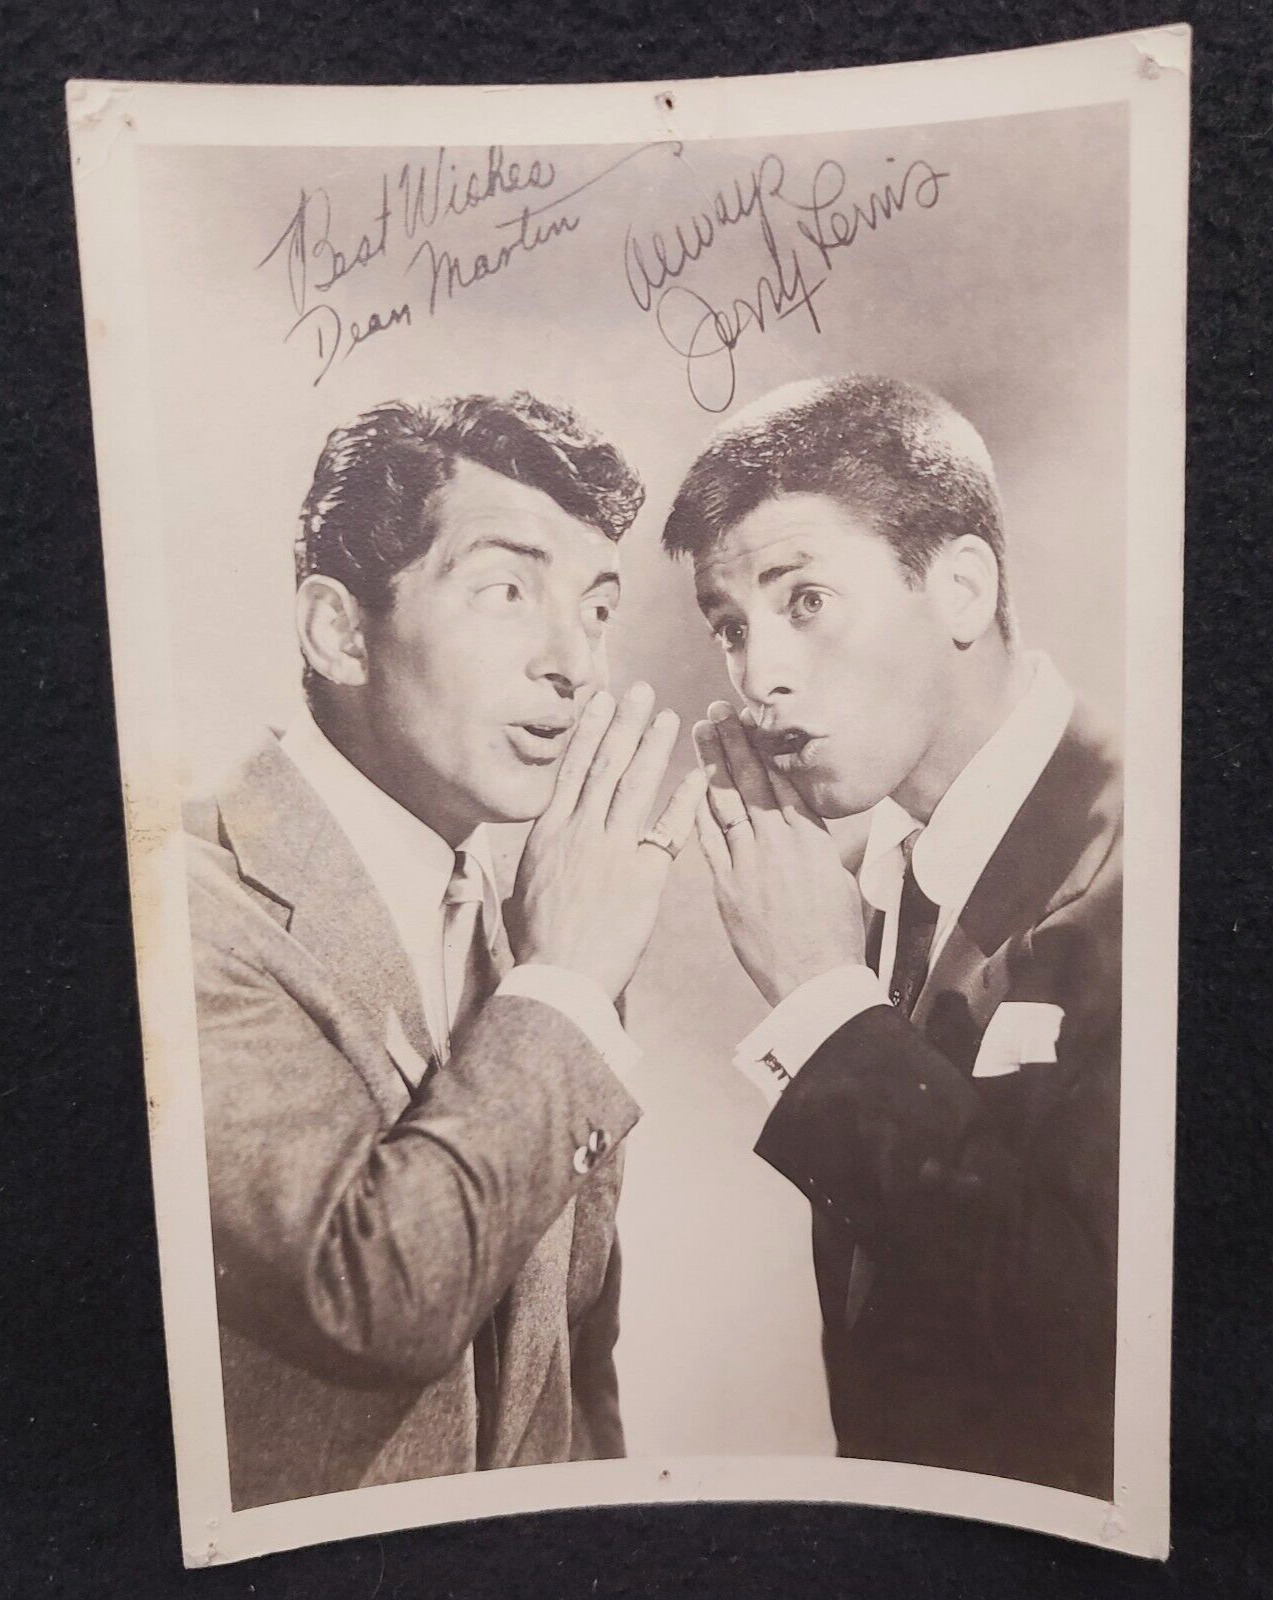 Funny Shot of DEAN MARTIN & JERRY LEWIS Whispering 1957 Press Photo